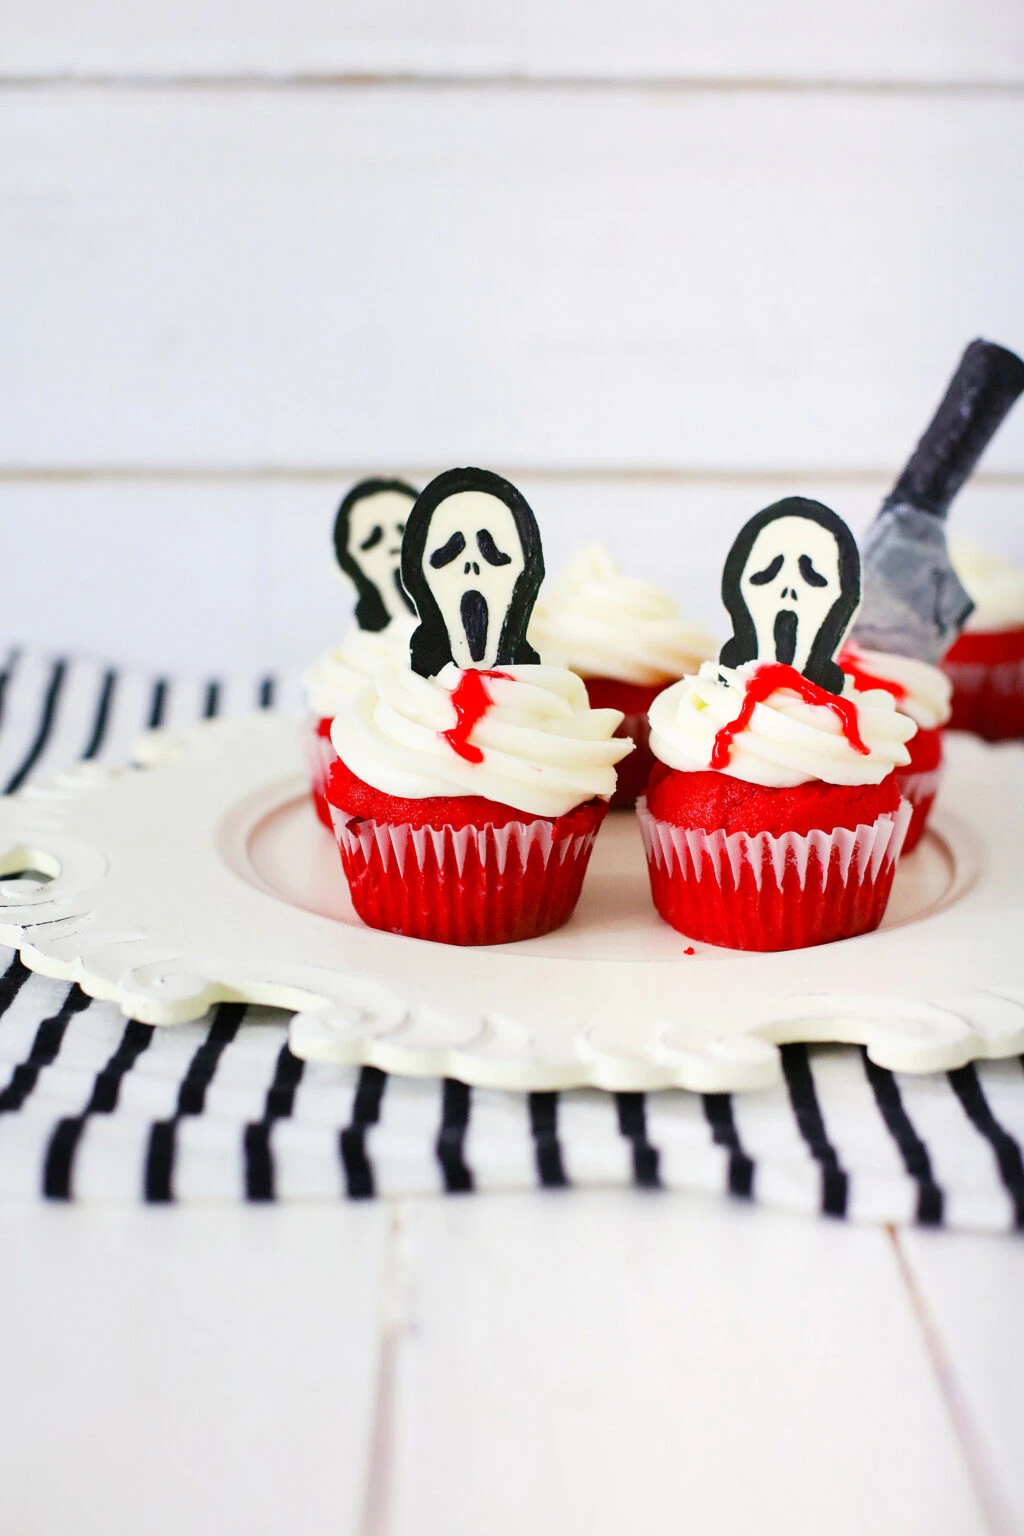 scream cupcakes on a white plate